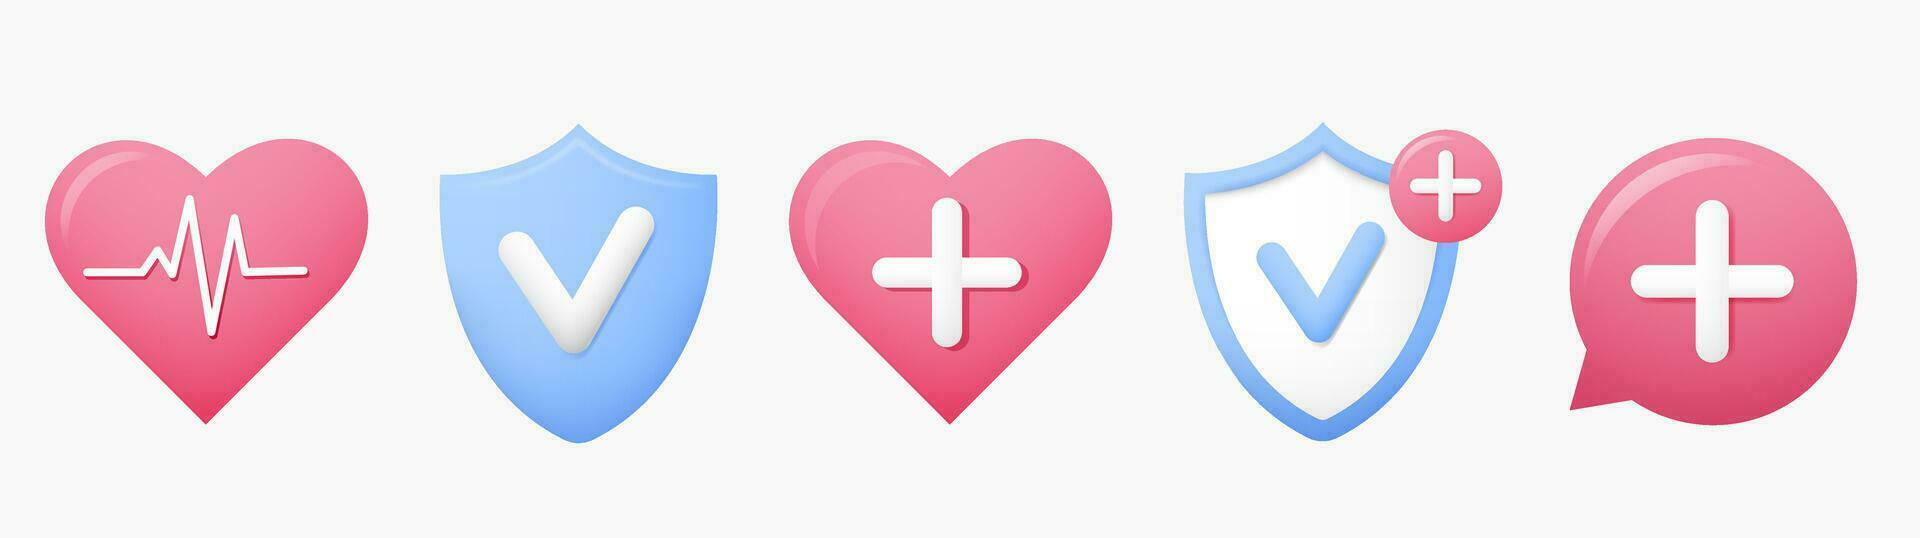 Heart with pulse, shield with checkmark, medical cross, icon collection vector